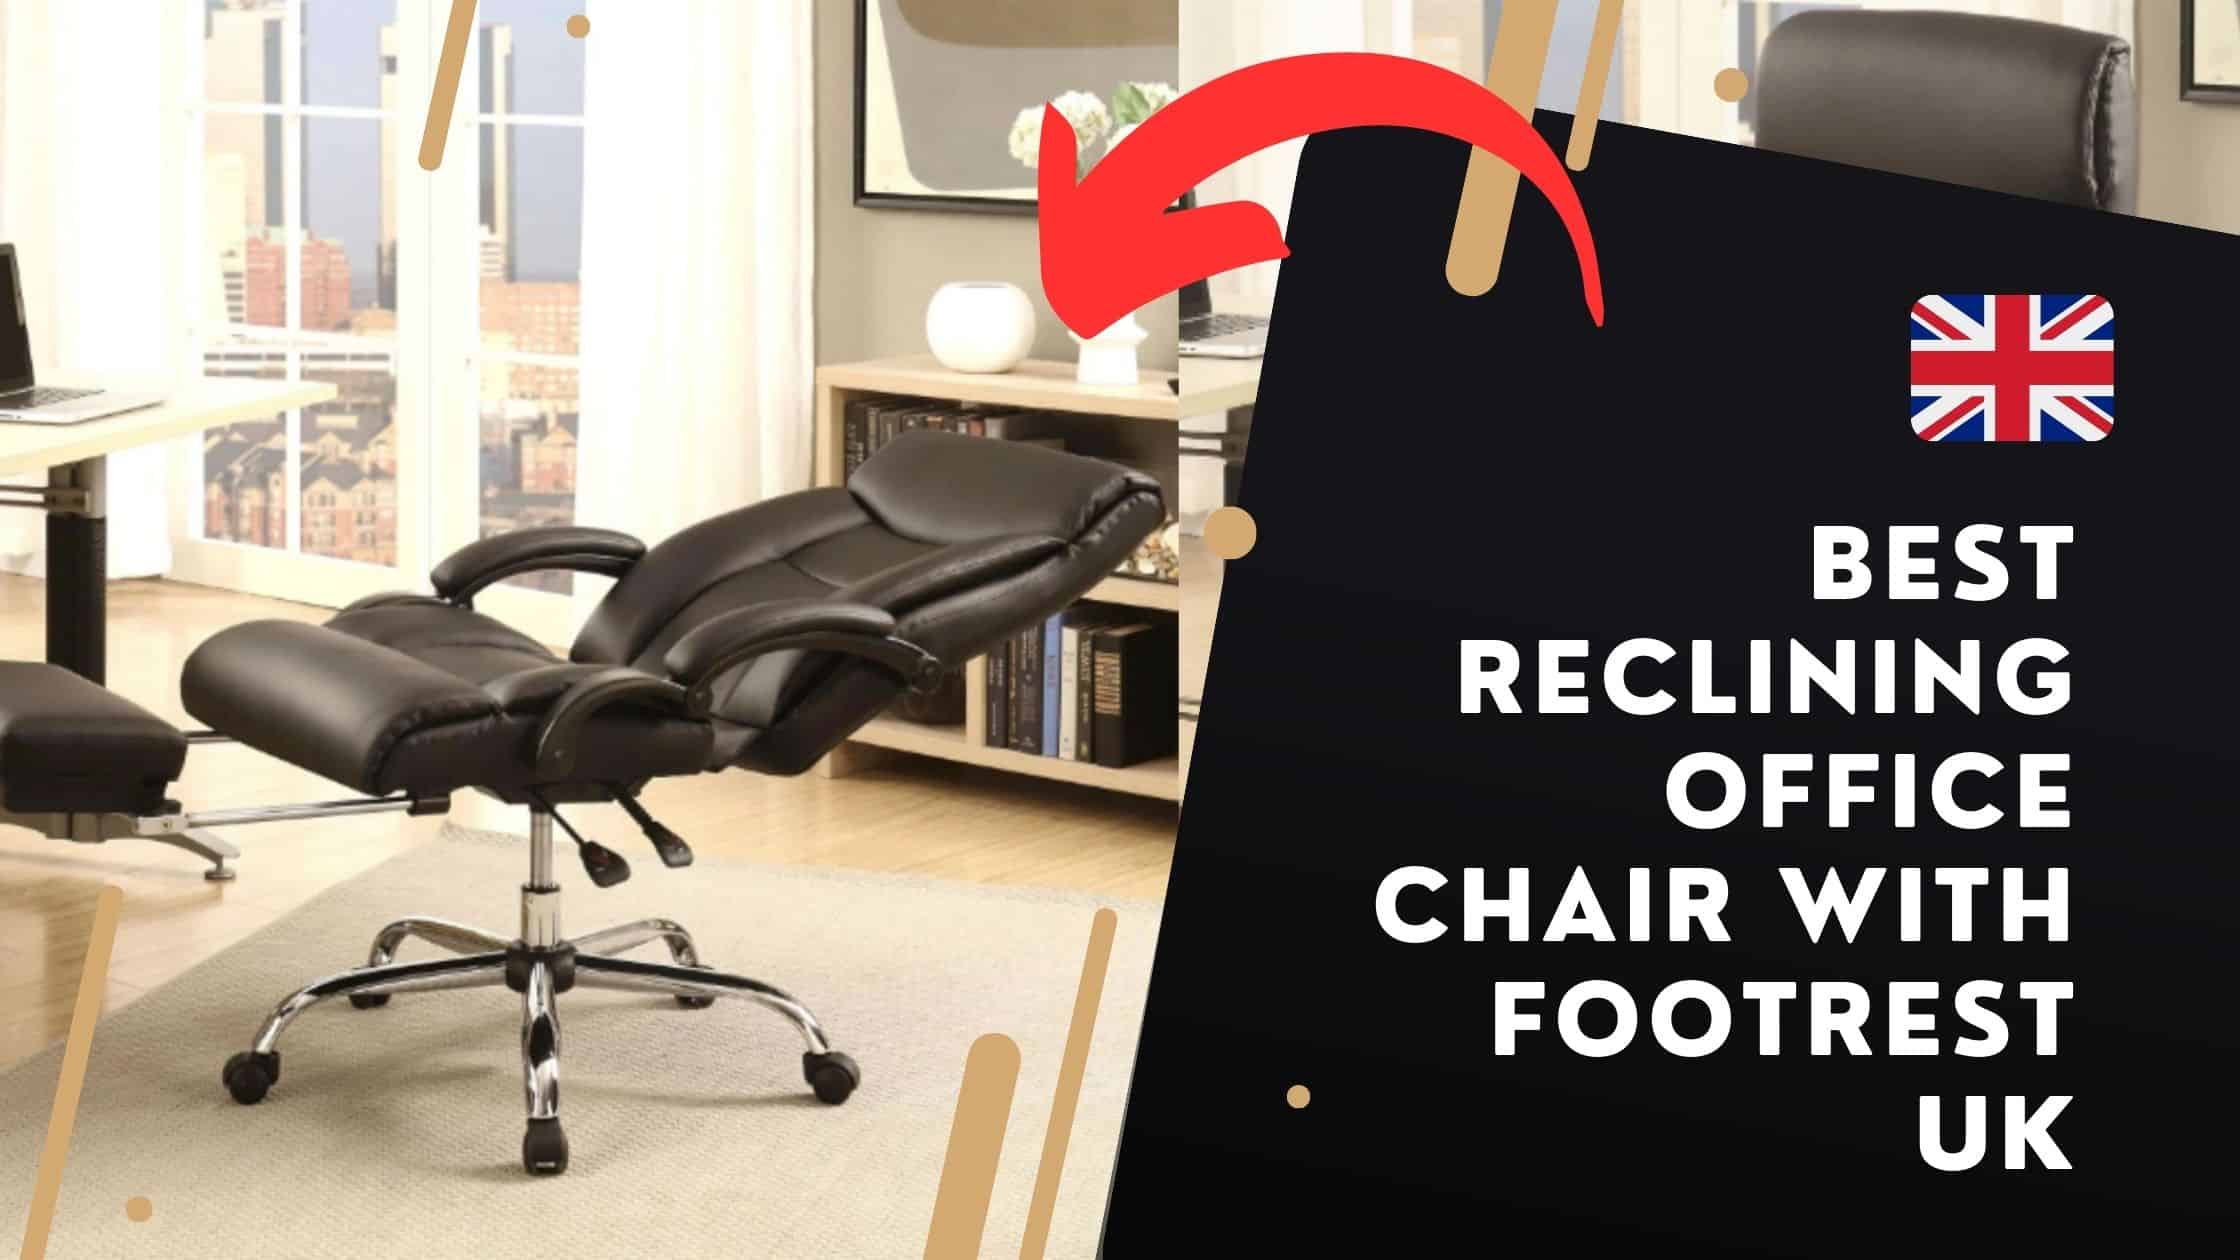 Best Reclining Office Chair With Footrest UK